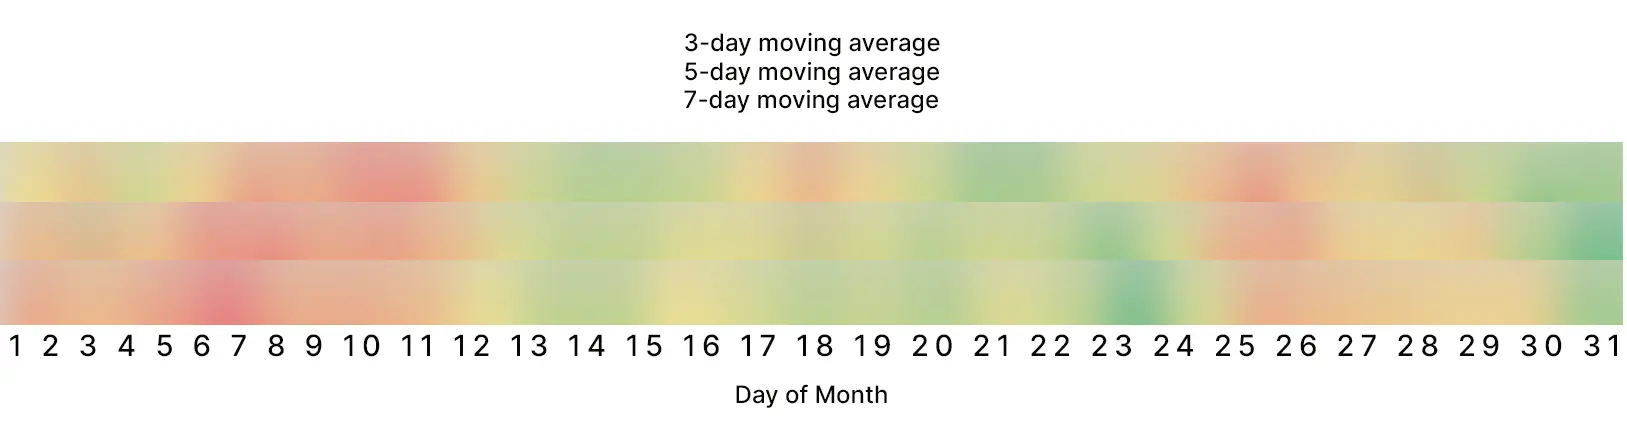 day of month best time to invest averages color coded